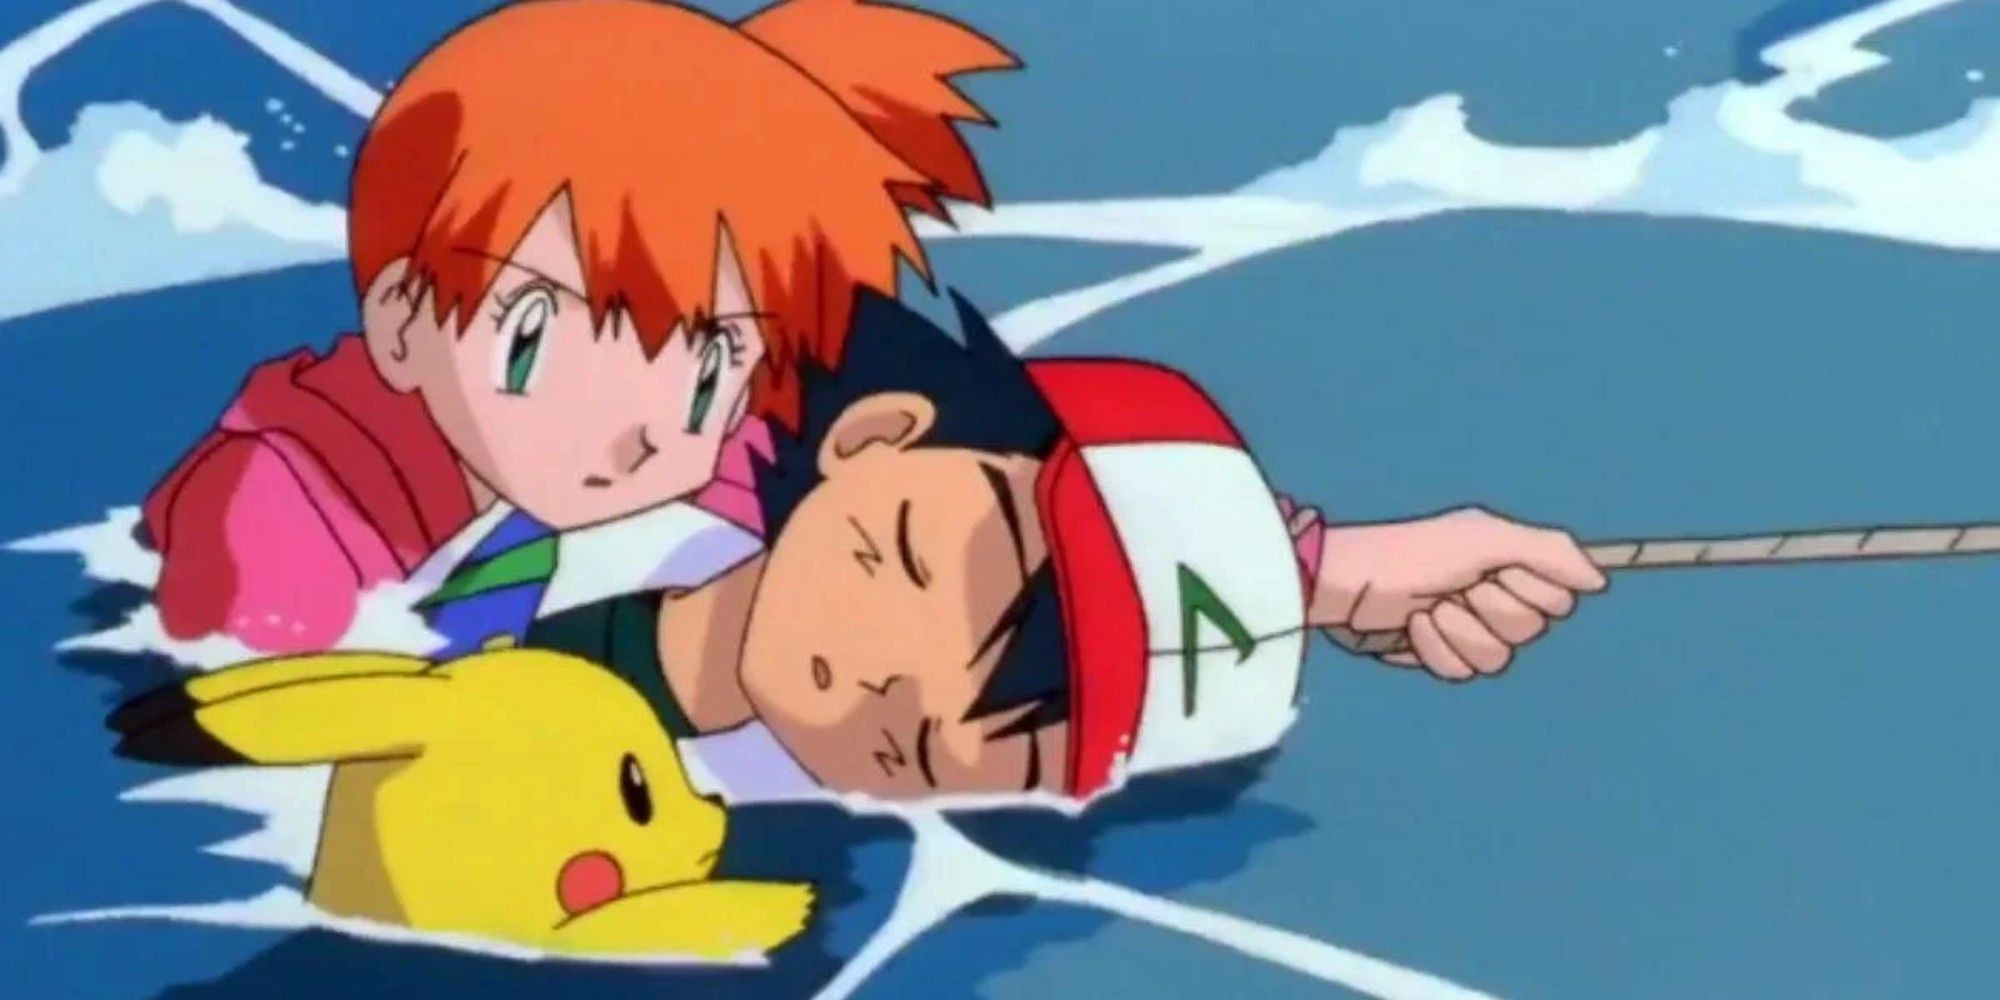 Misty saving Ash, from the Pokemon anime, holding him afloat as he's knocked out with Pikachu